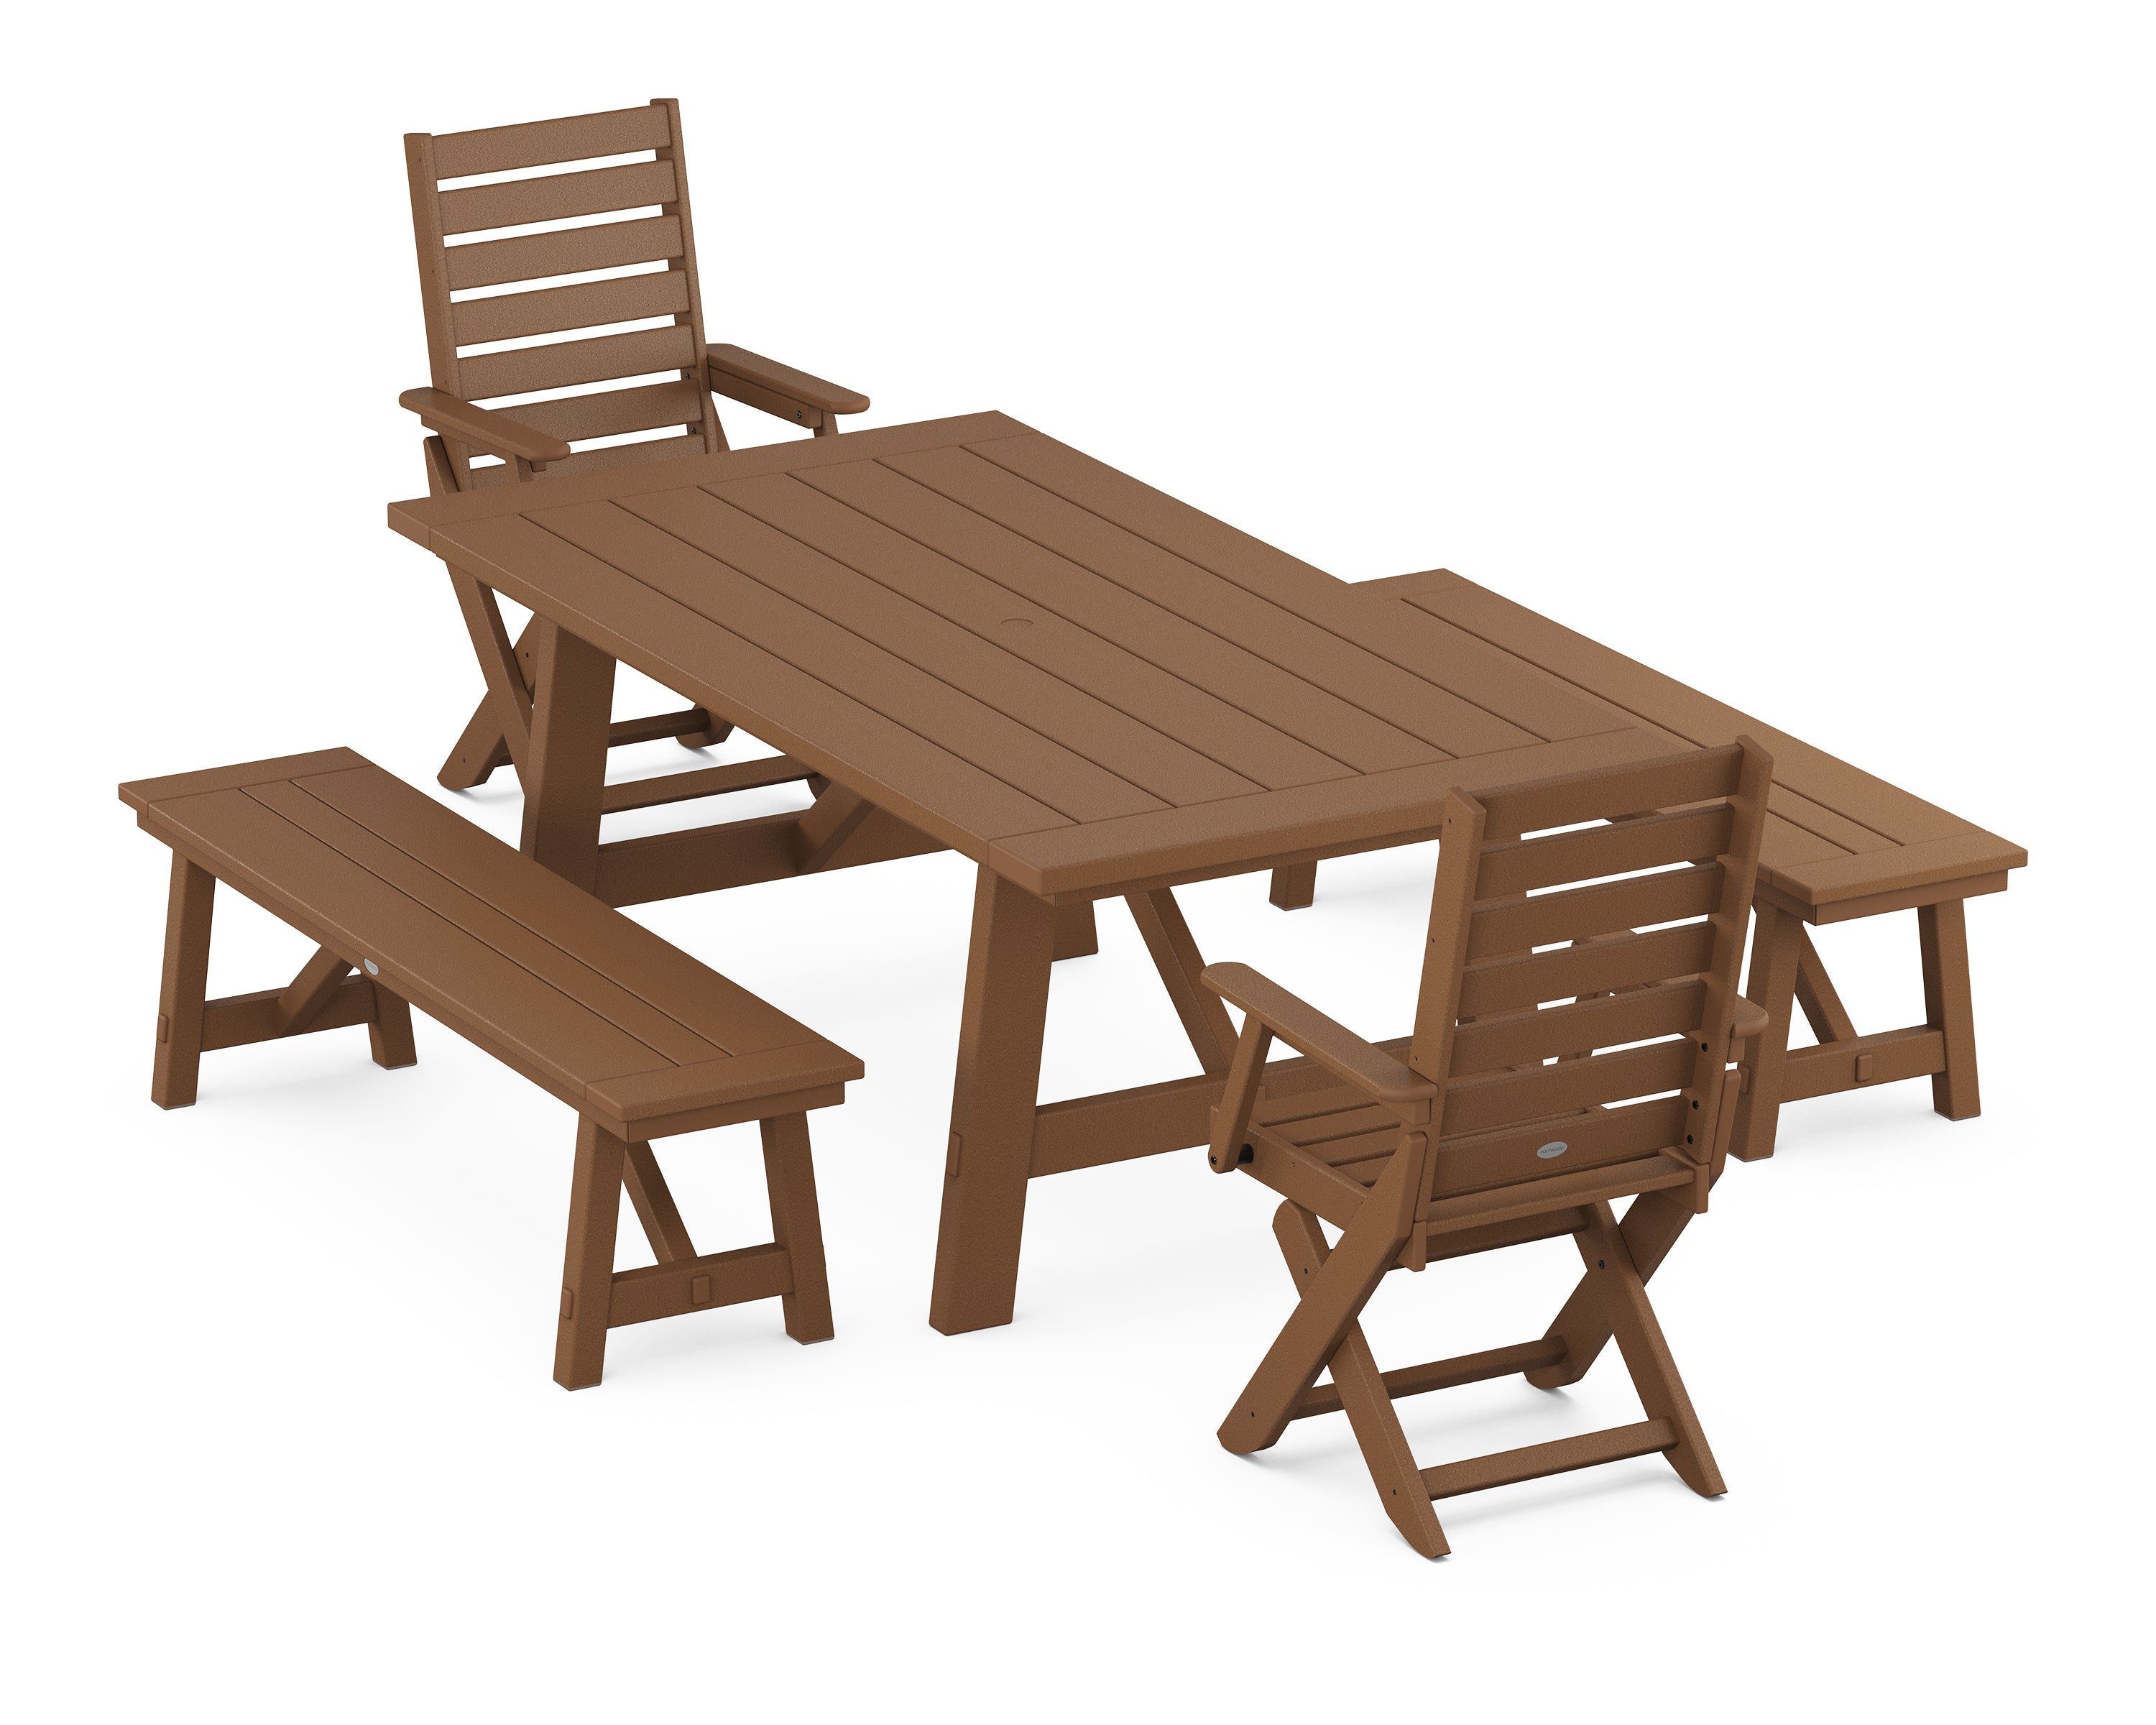 POLYWOOD® Captain Folding Chair 5-Piece Rustic Farmhouse Dining Set With Benches in Teak